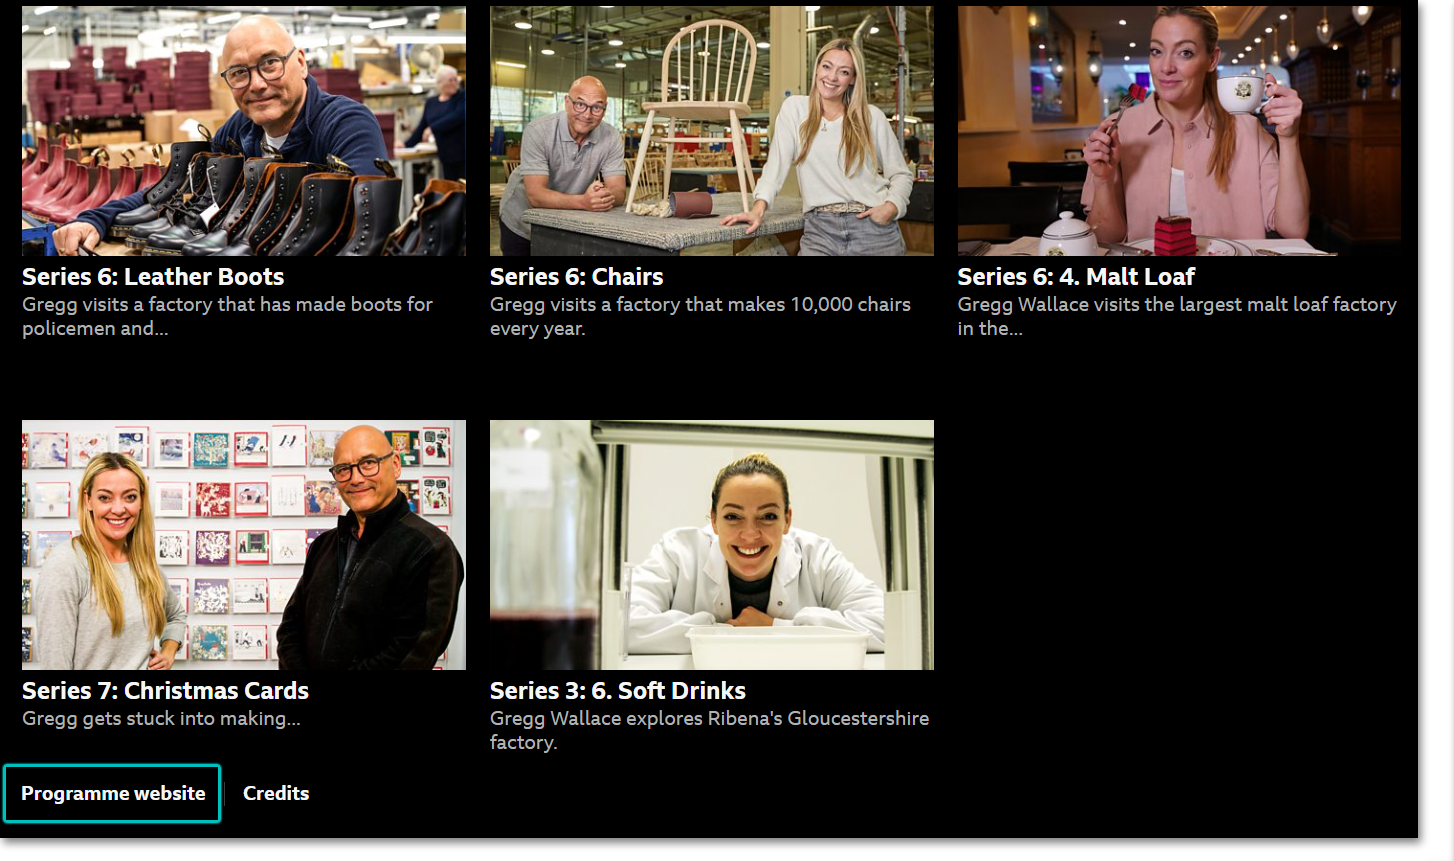 Image of an episode list on the iPlayer website. The 'Programme website' link is highlighted